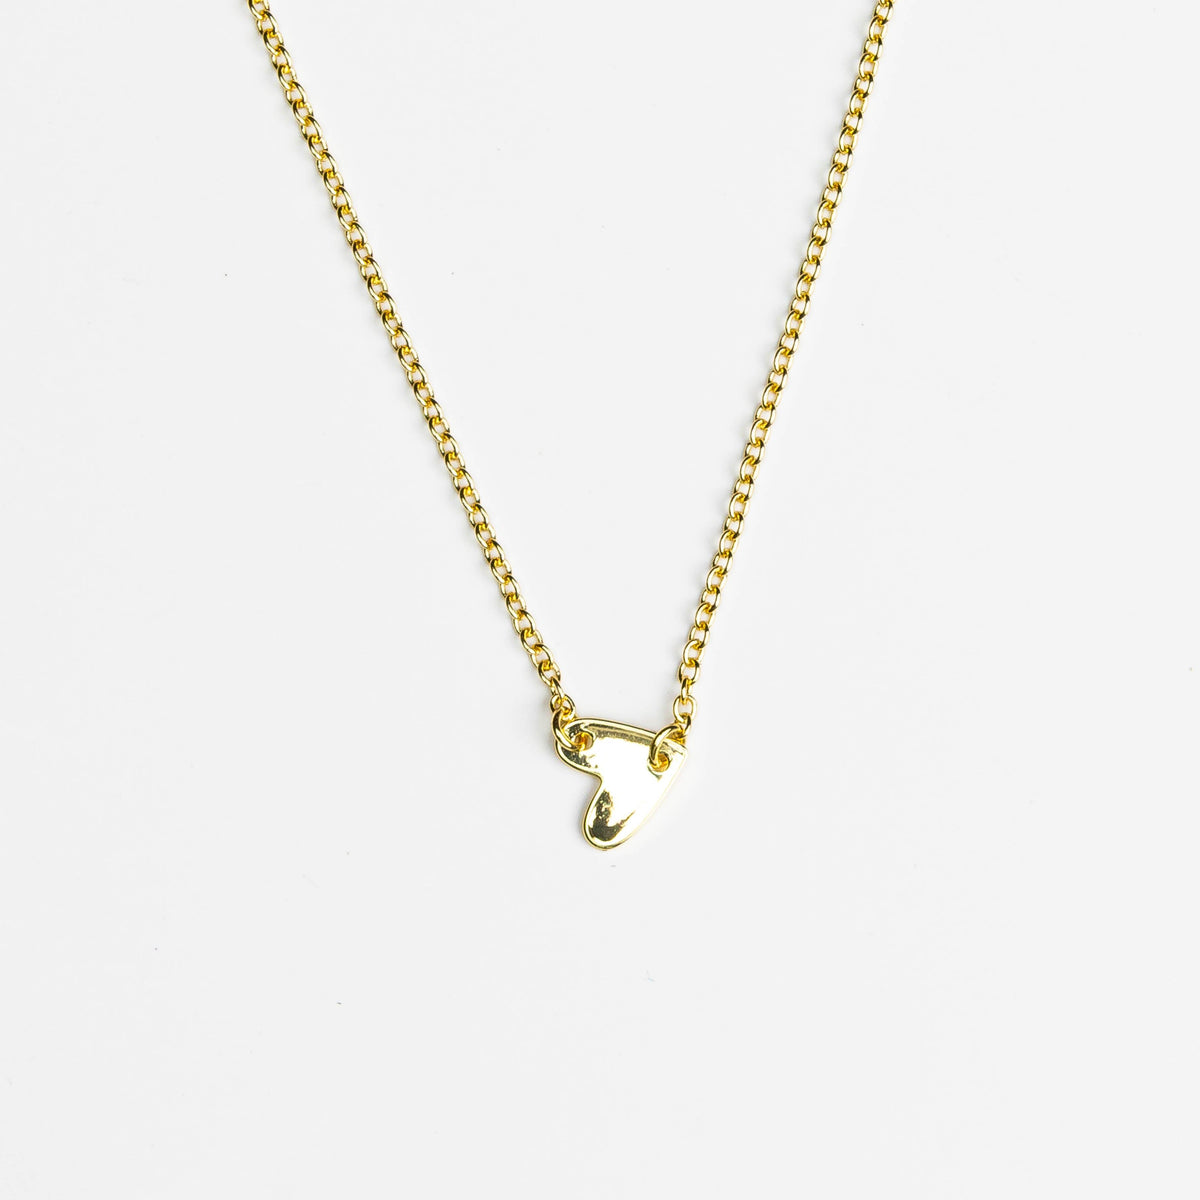 HARLOW by Nashelle | Handcrafted Gold Plated Jewelry